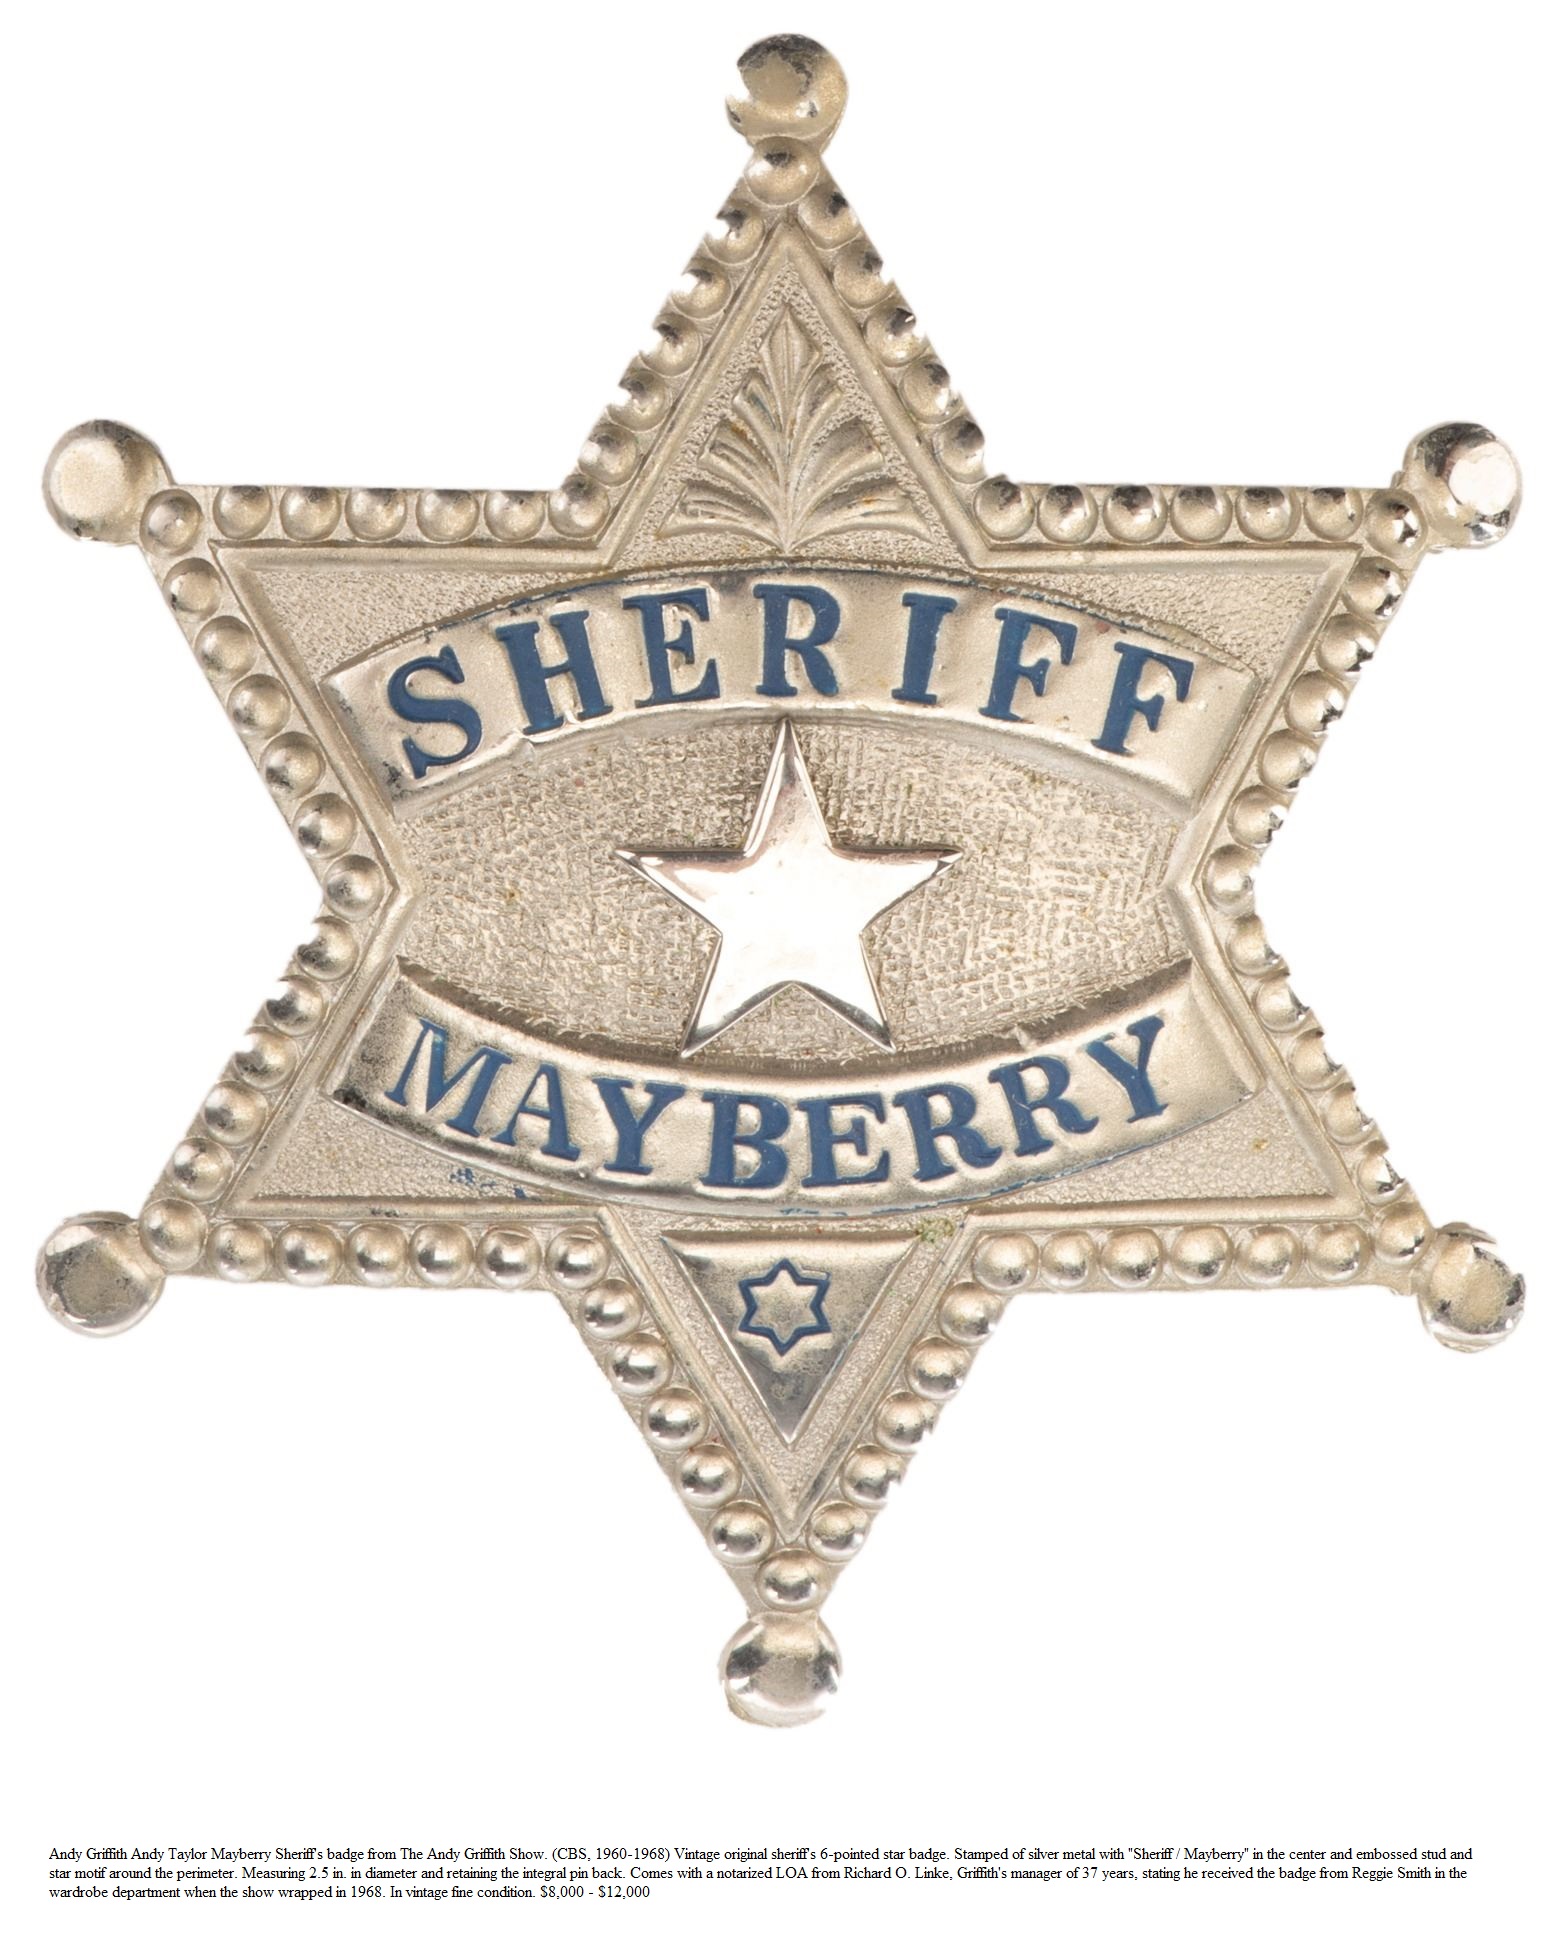 Mayberry_Badge-Andy Taylor-Real Prop (2)..jpg